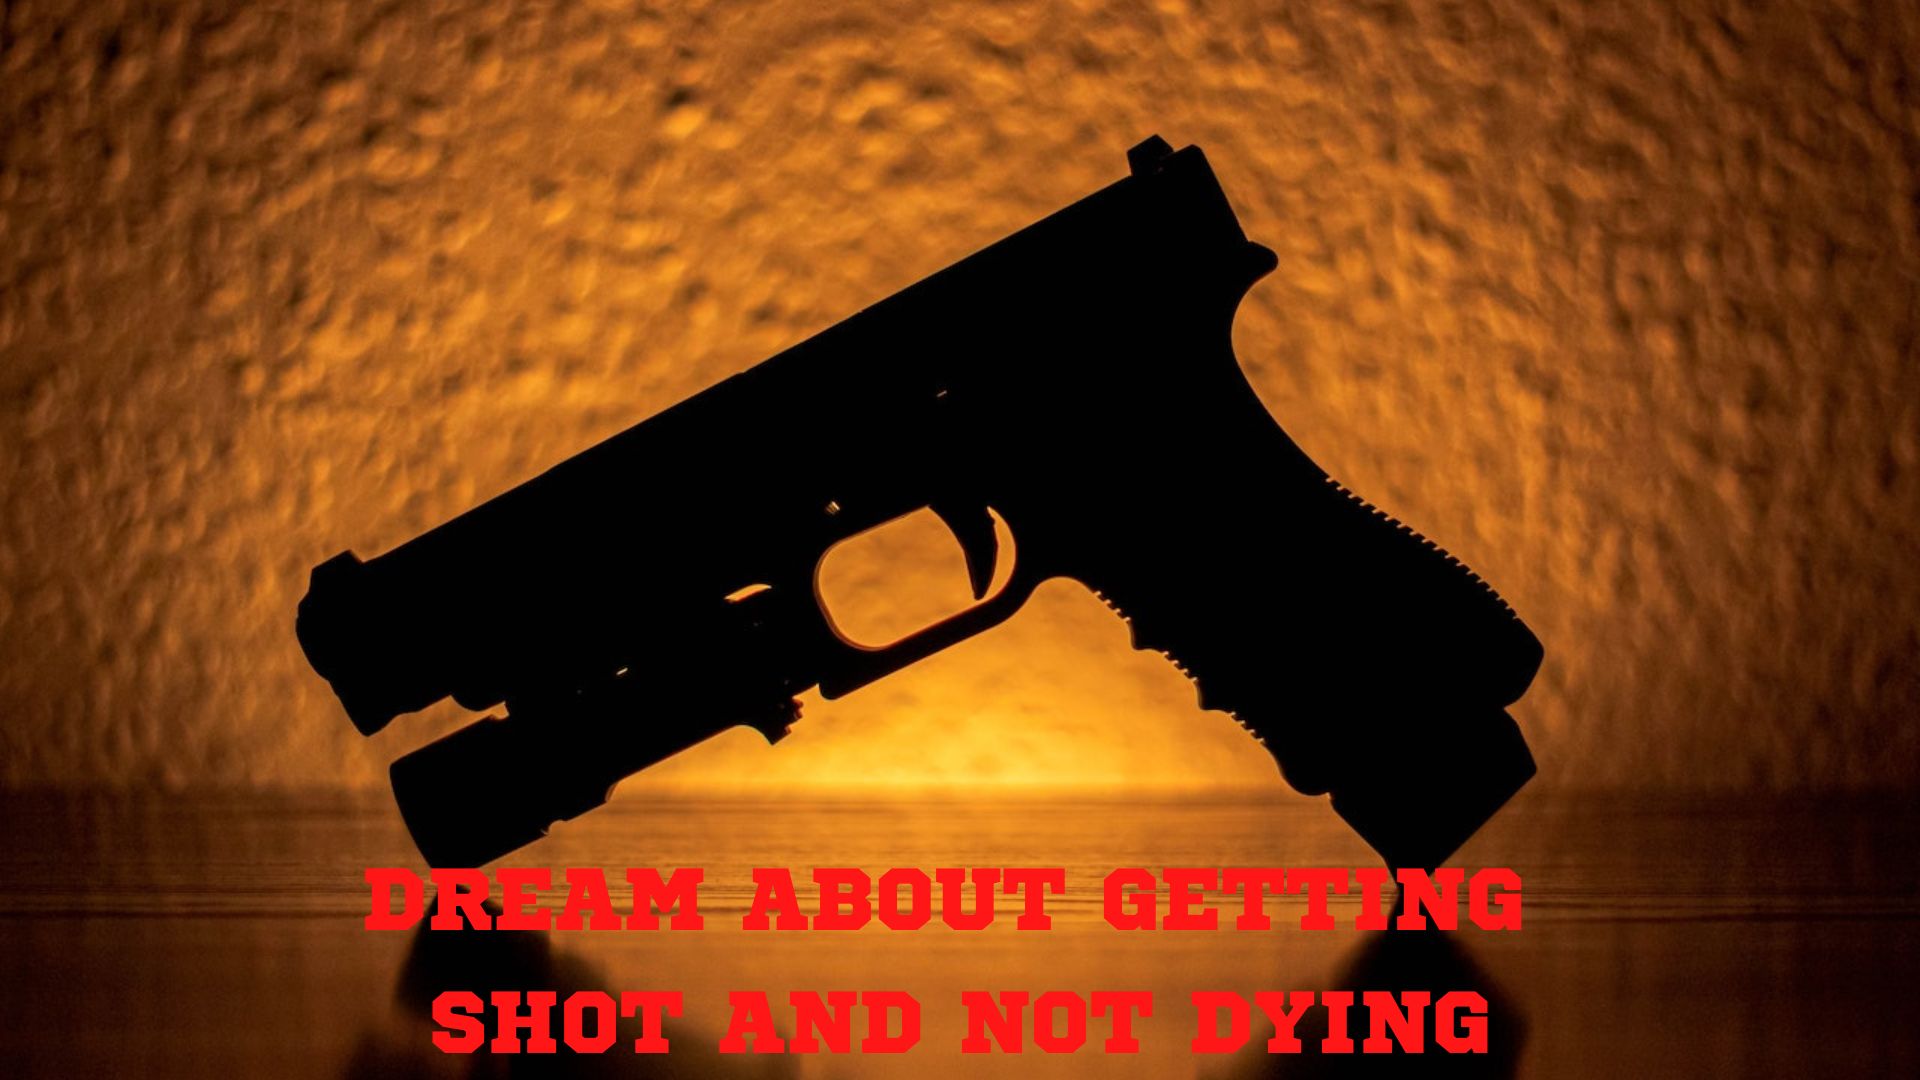 Dream About Getting Shot And Not Dying Meaning